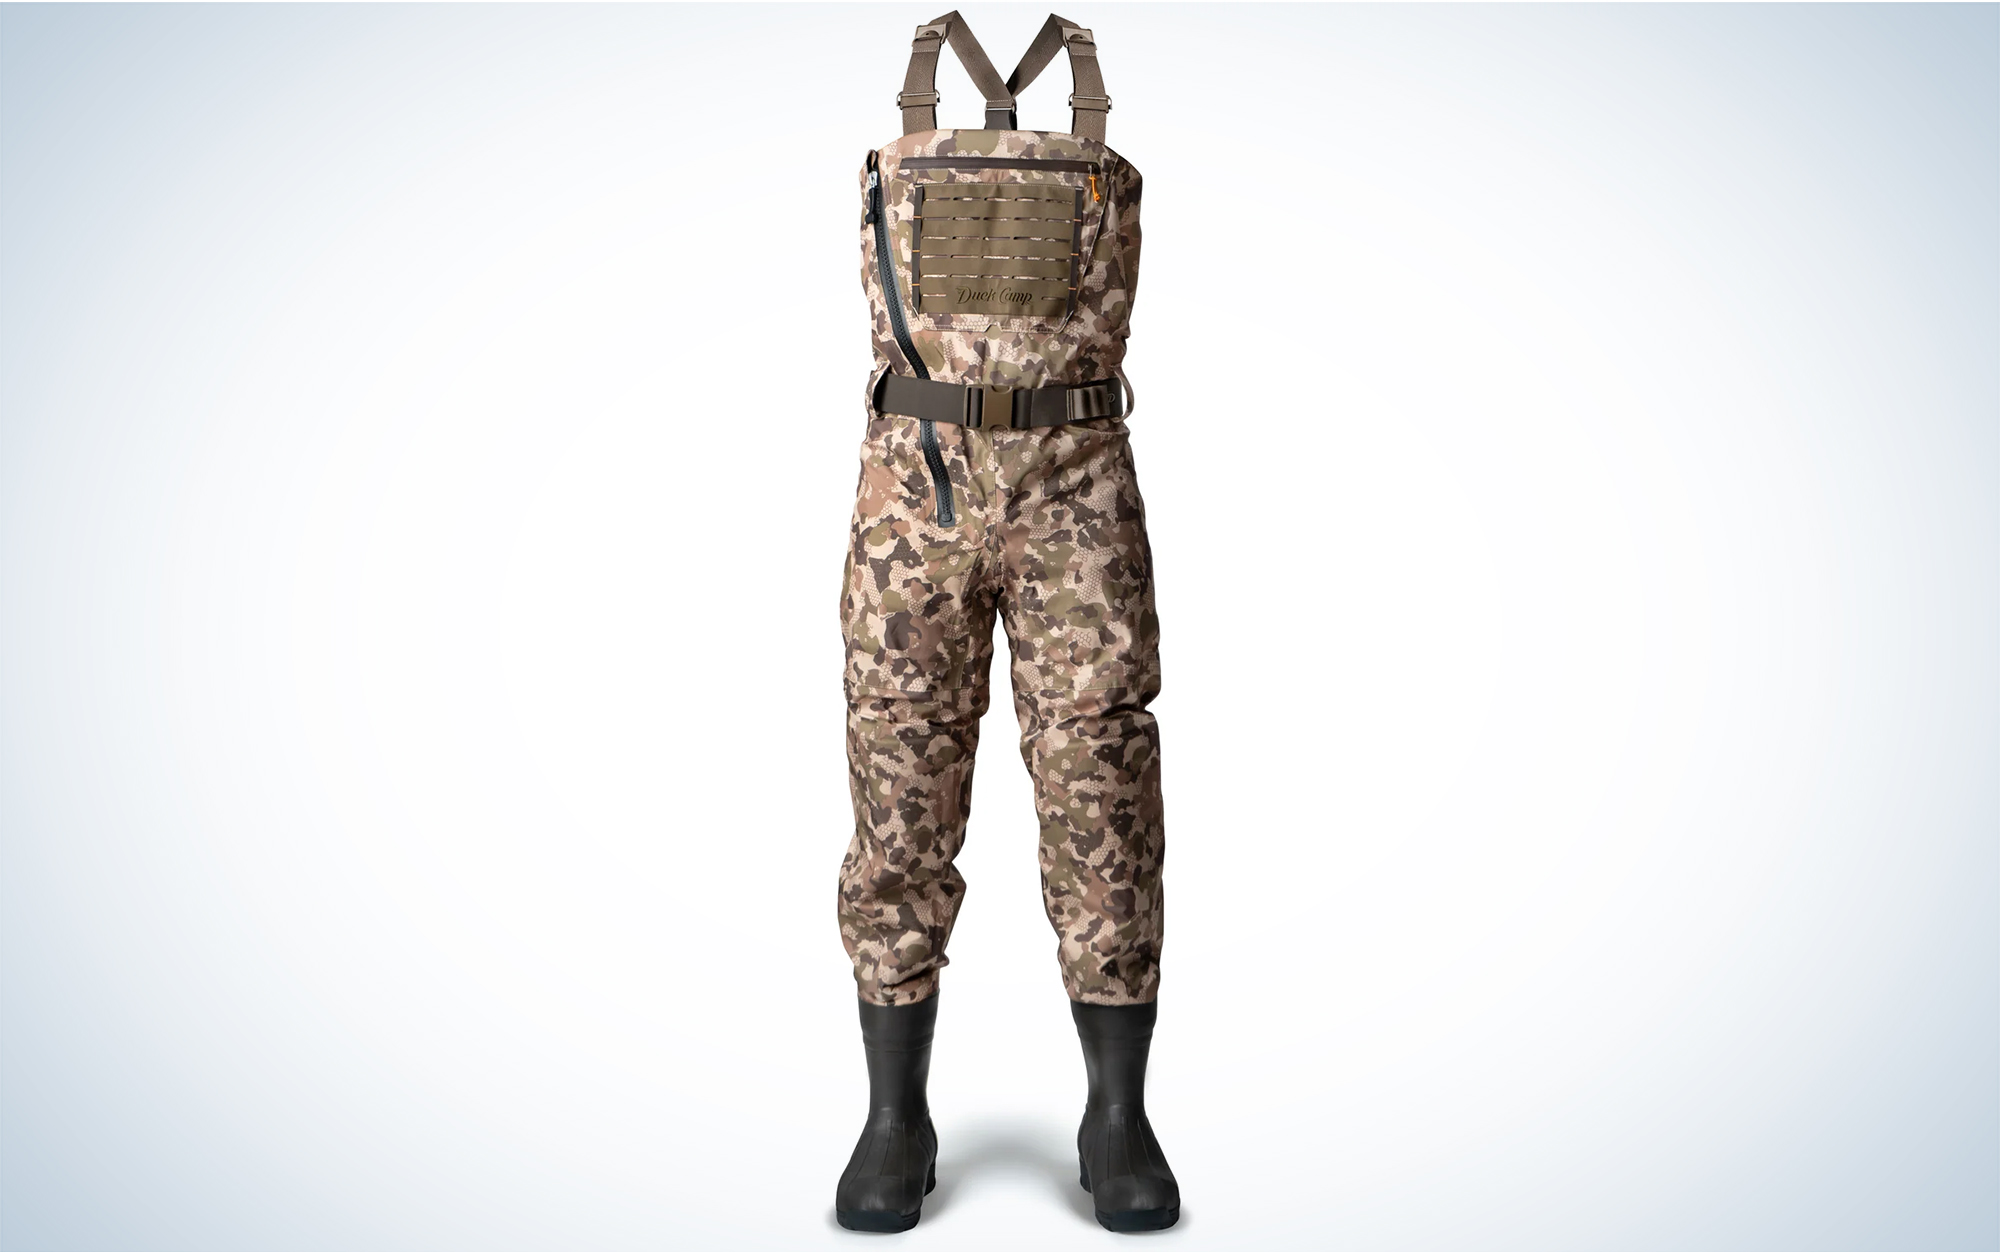 We tested the Duck Camp Zip Waders.